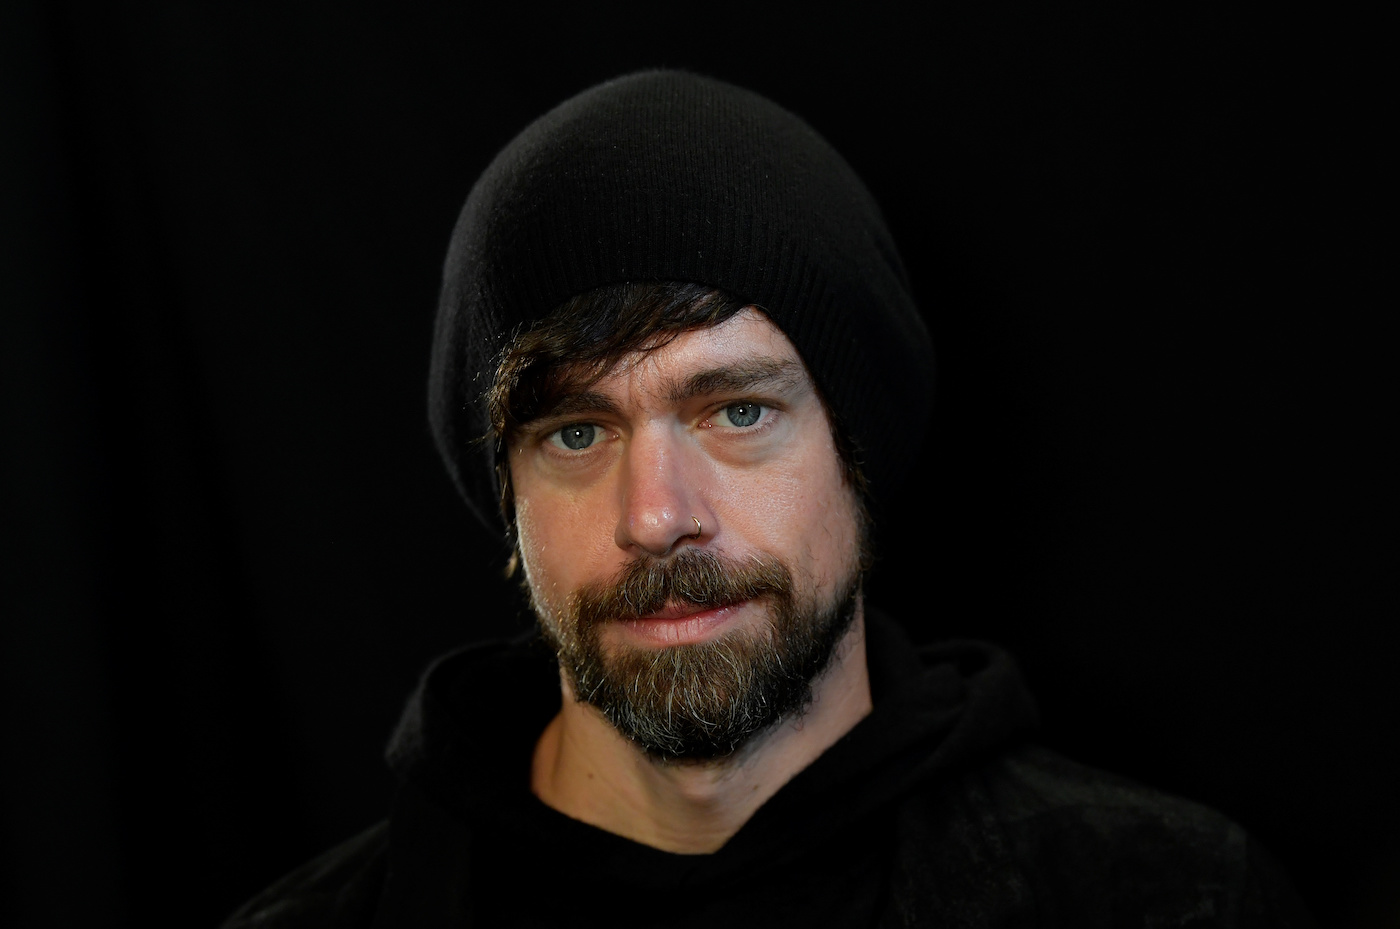 Jack Dorsey Says Bitcoin ‘Will Unite a Deeply Divided Nation’